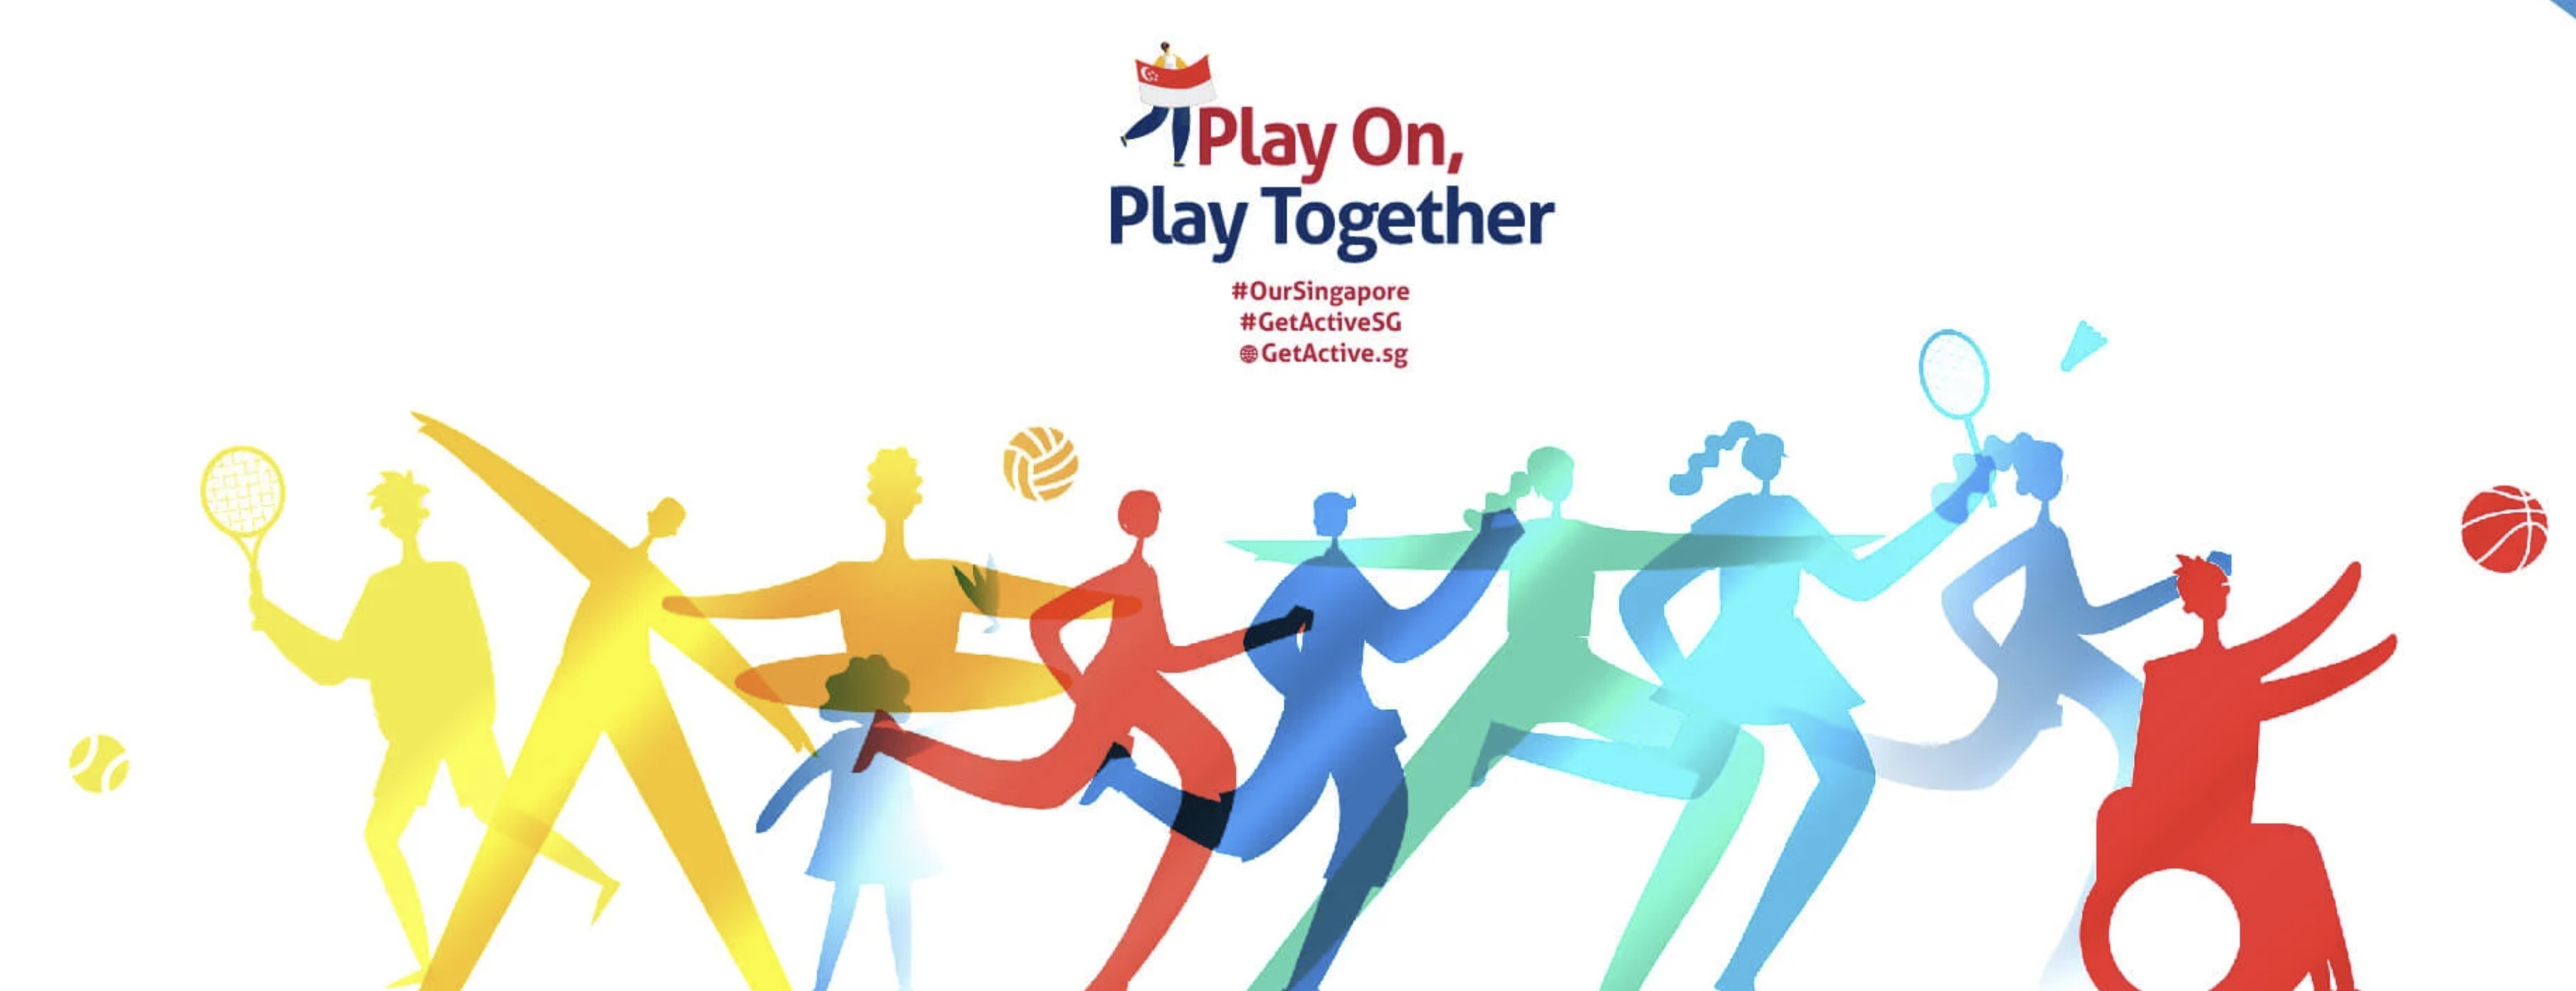 Get Active! Singapore 2021 encourages everyone to play on, play together, in a creative, fun and safe way